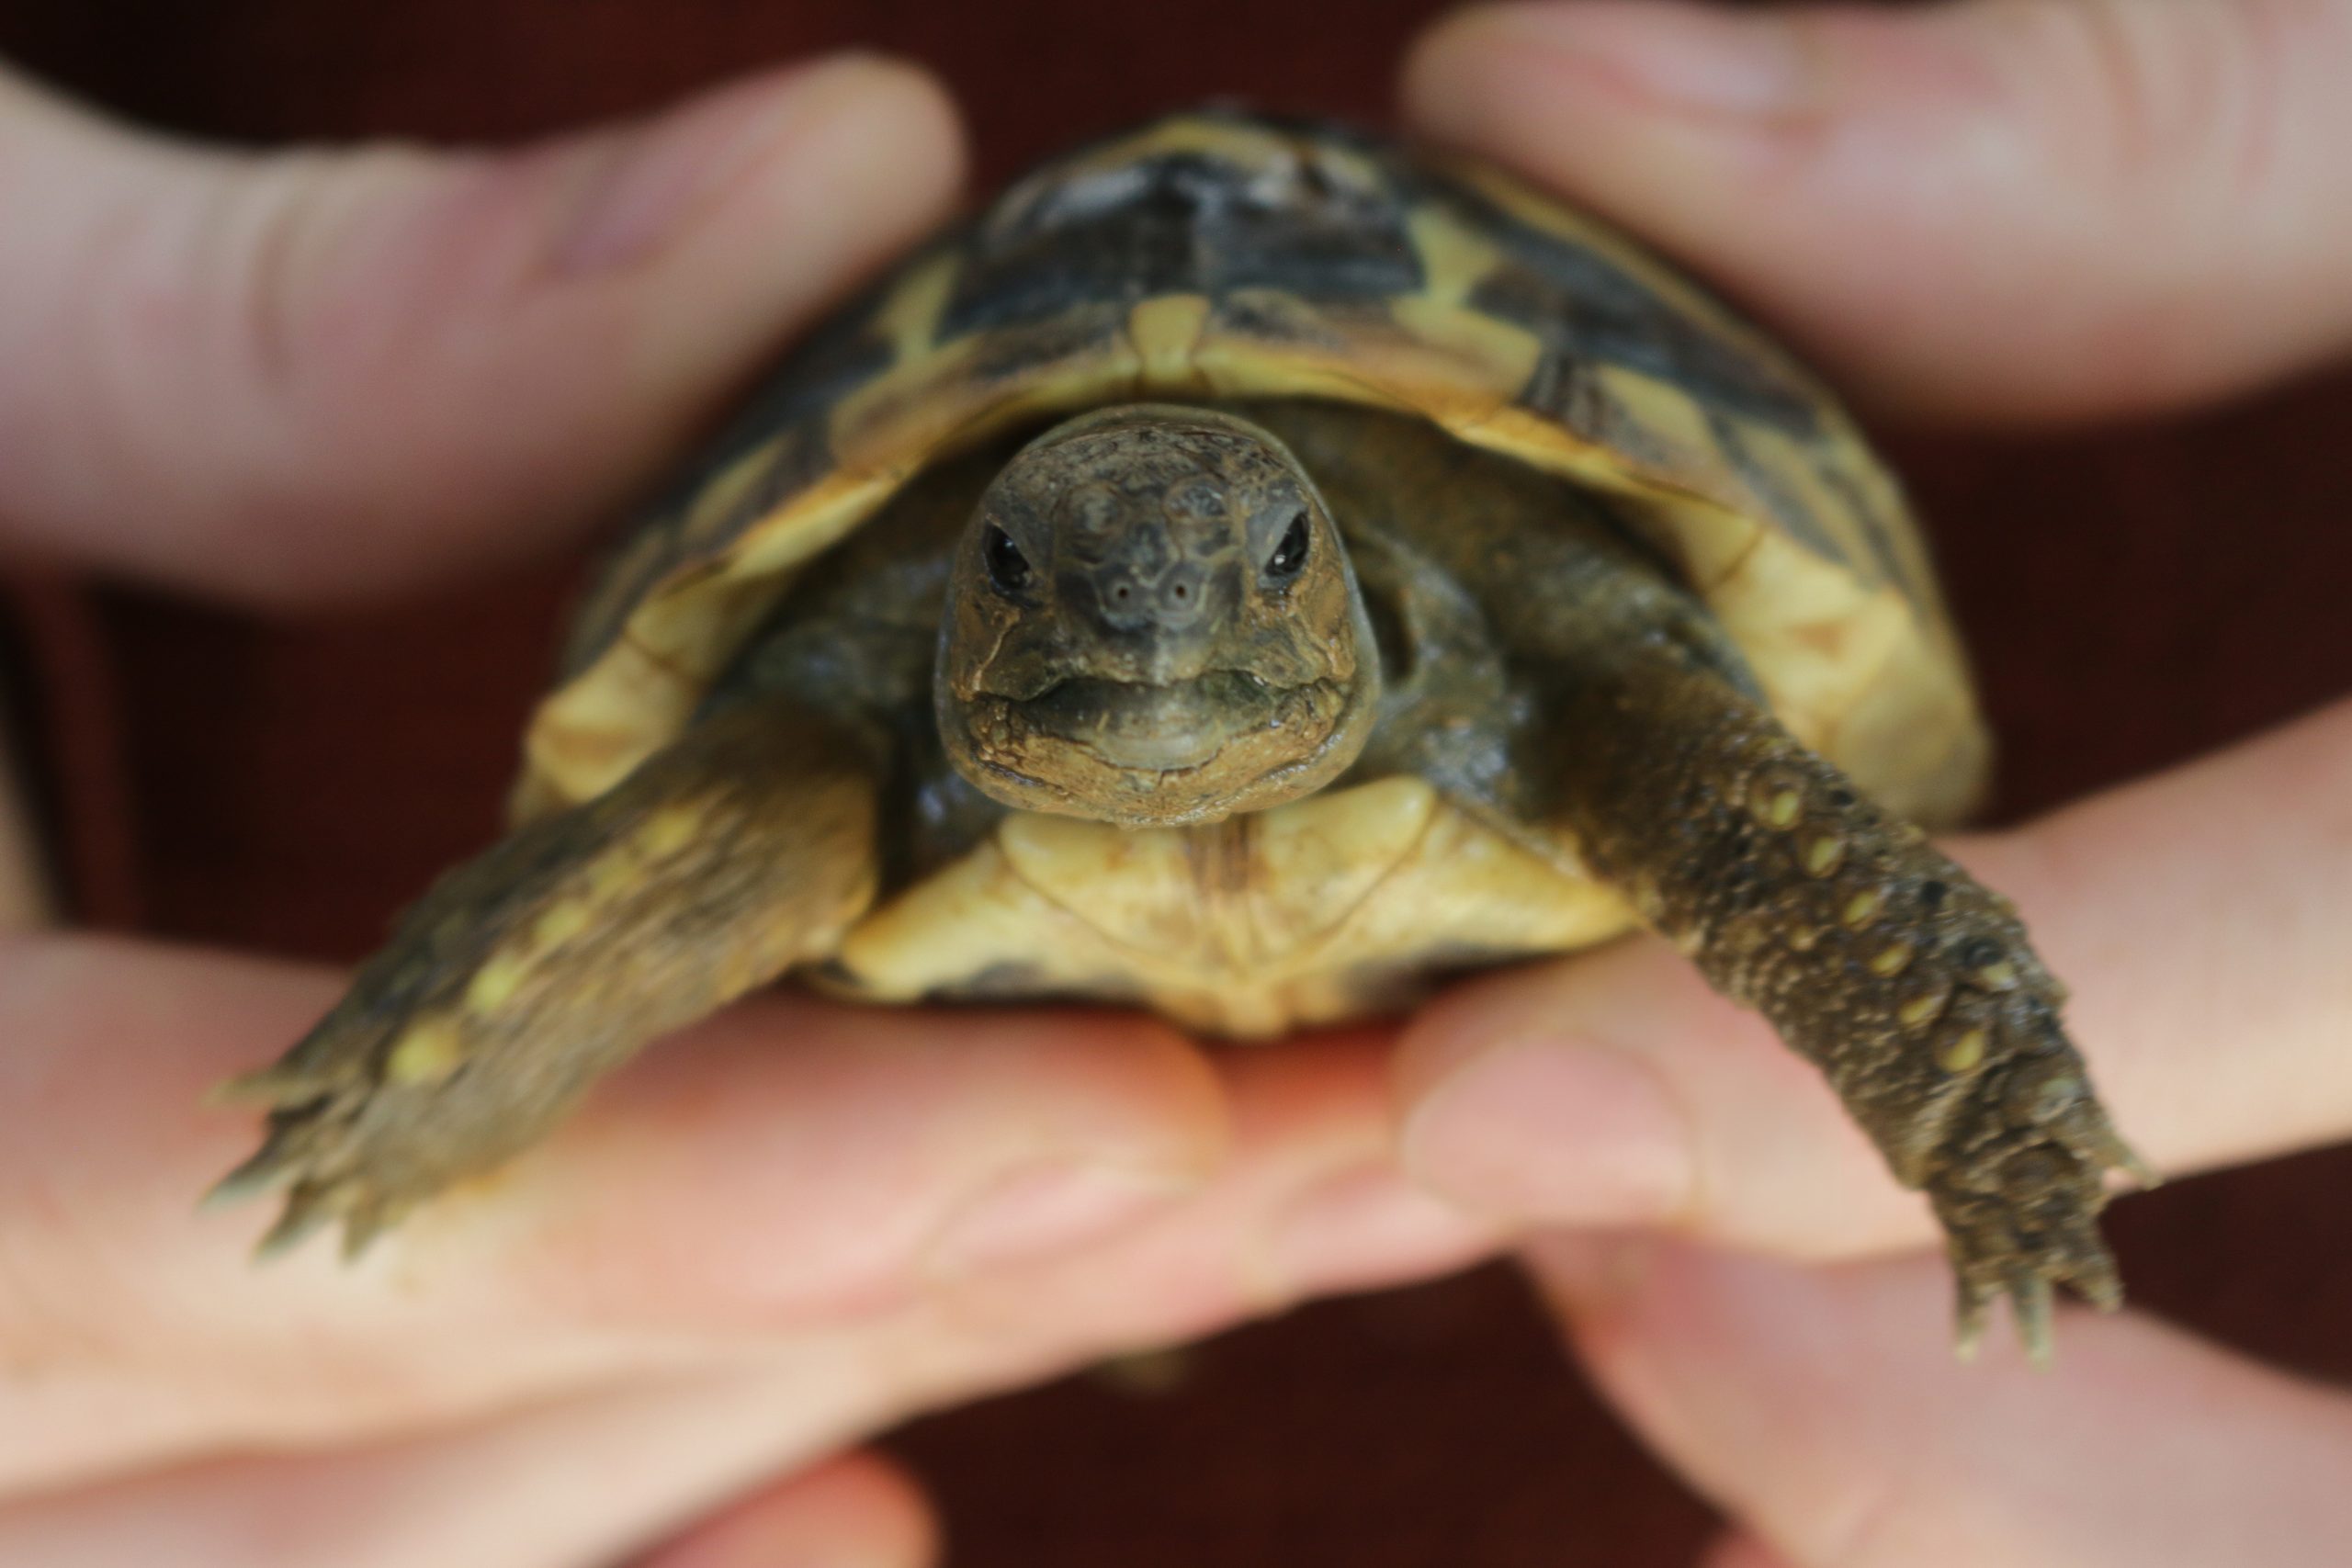 Image of young tame and friendly baby pet Russian Hartsfield diet / Hermann's tortoise being held in hand fingers to show size and scale, with head, face, eyes, shells, legs and claws, healthy pet tortoises diet food guide and caring for tortoiseshell